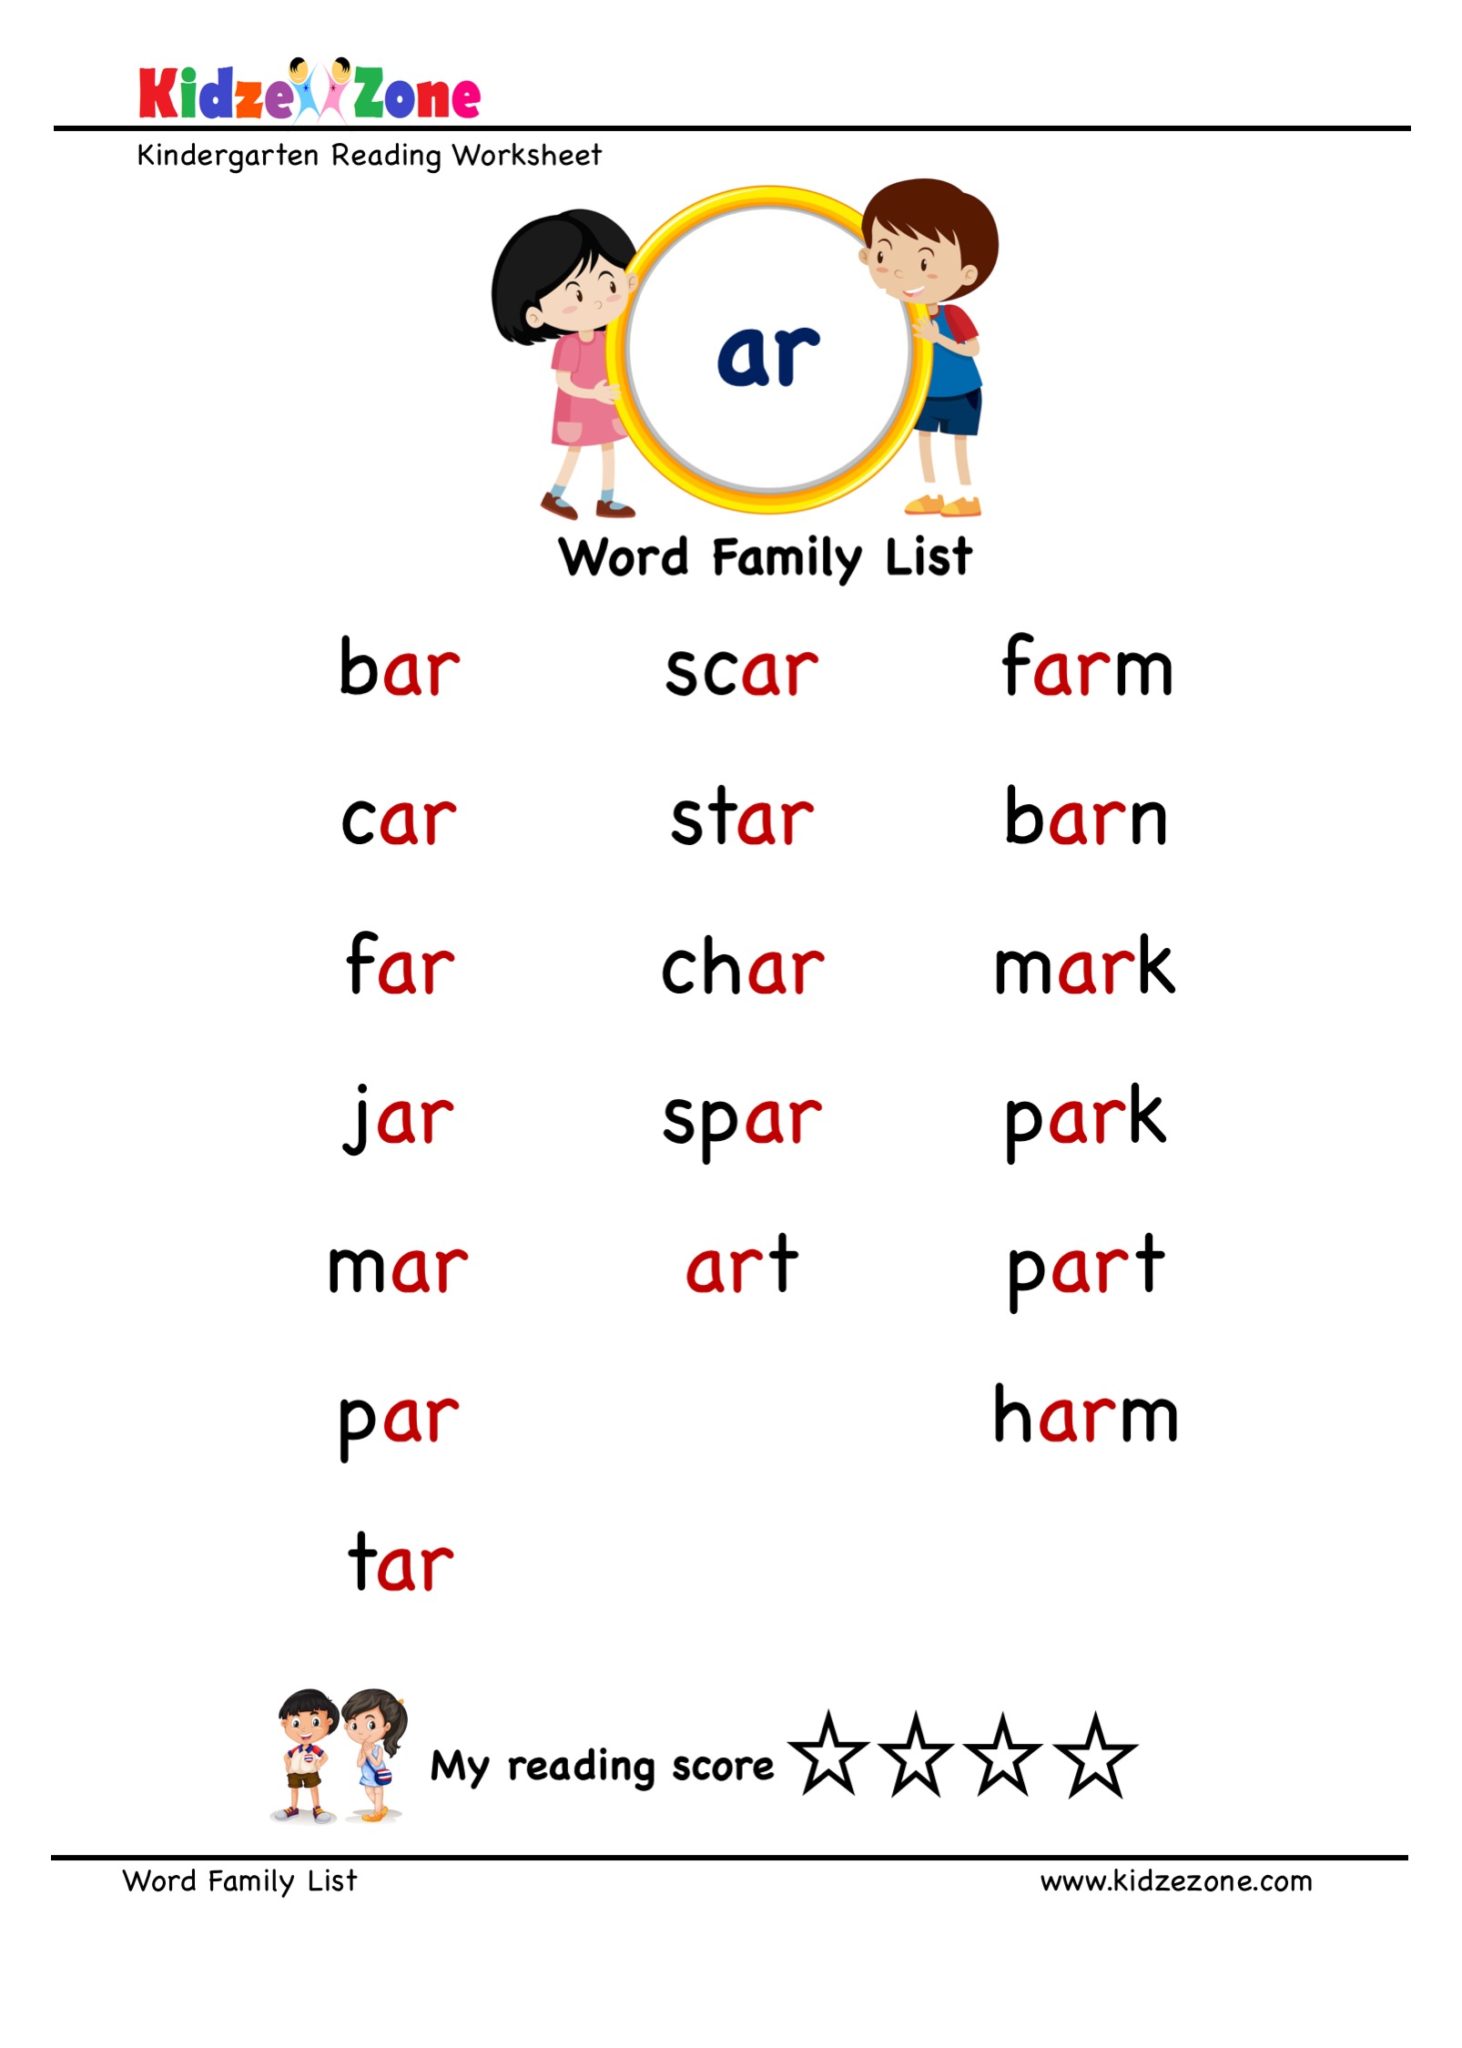 Explore and learn words from "ar" word family with word list worksheet